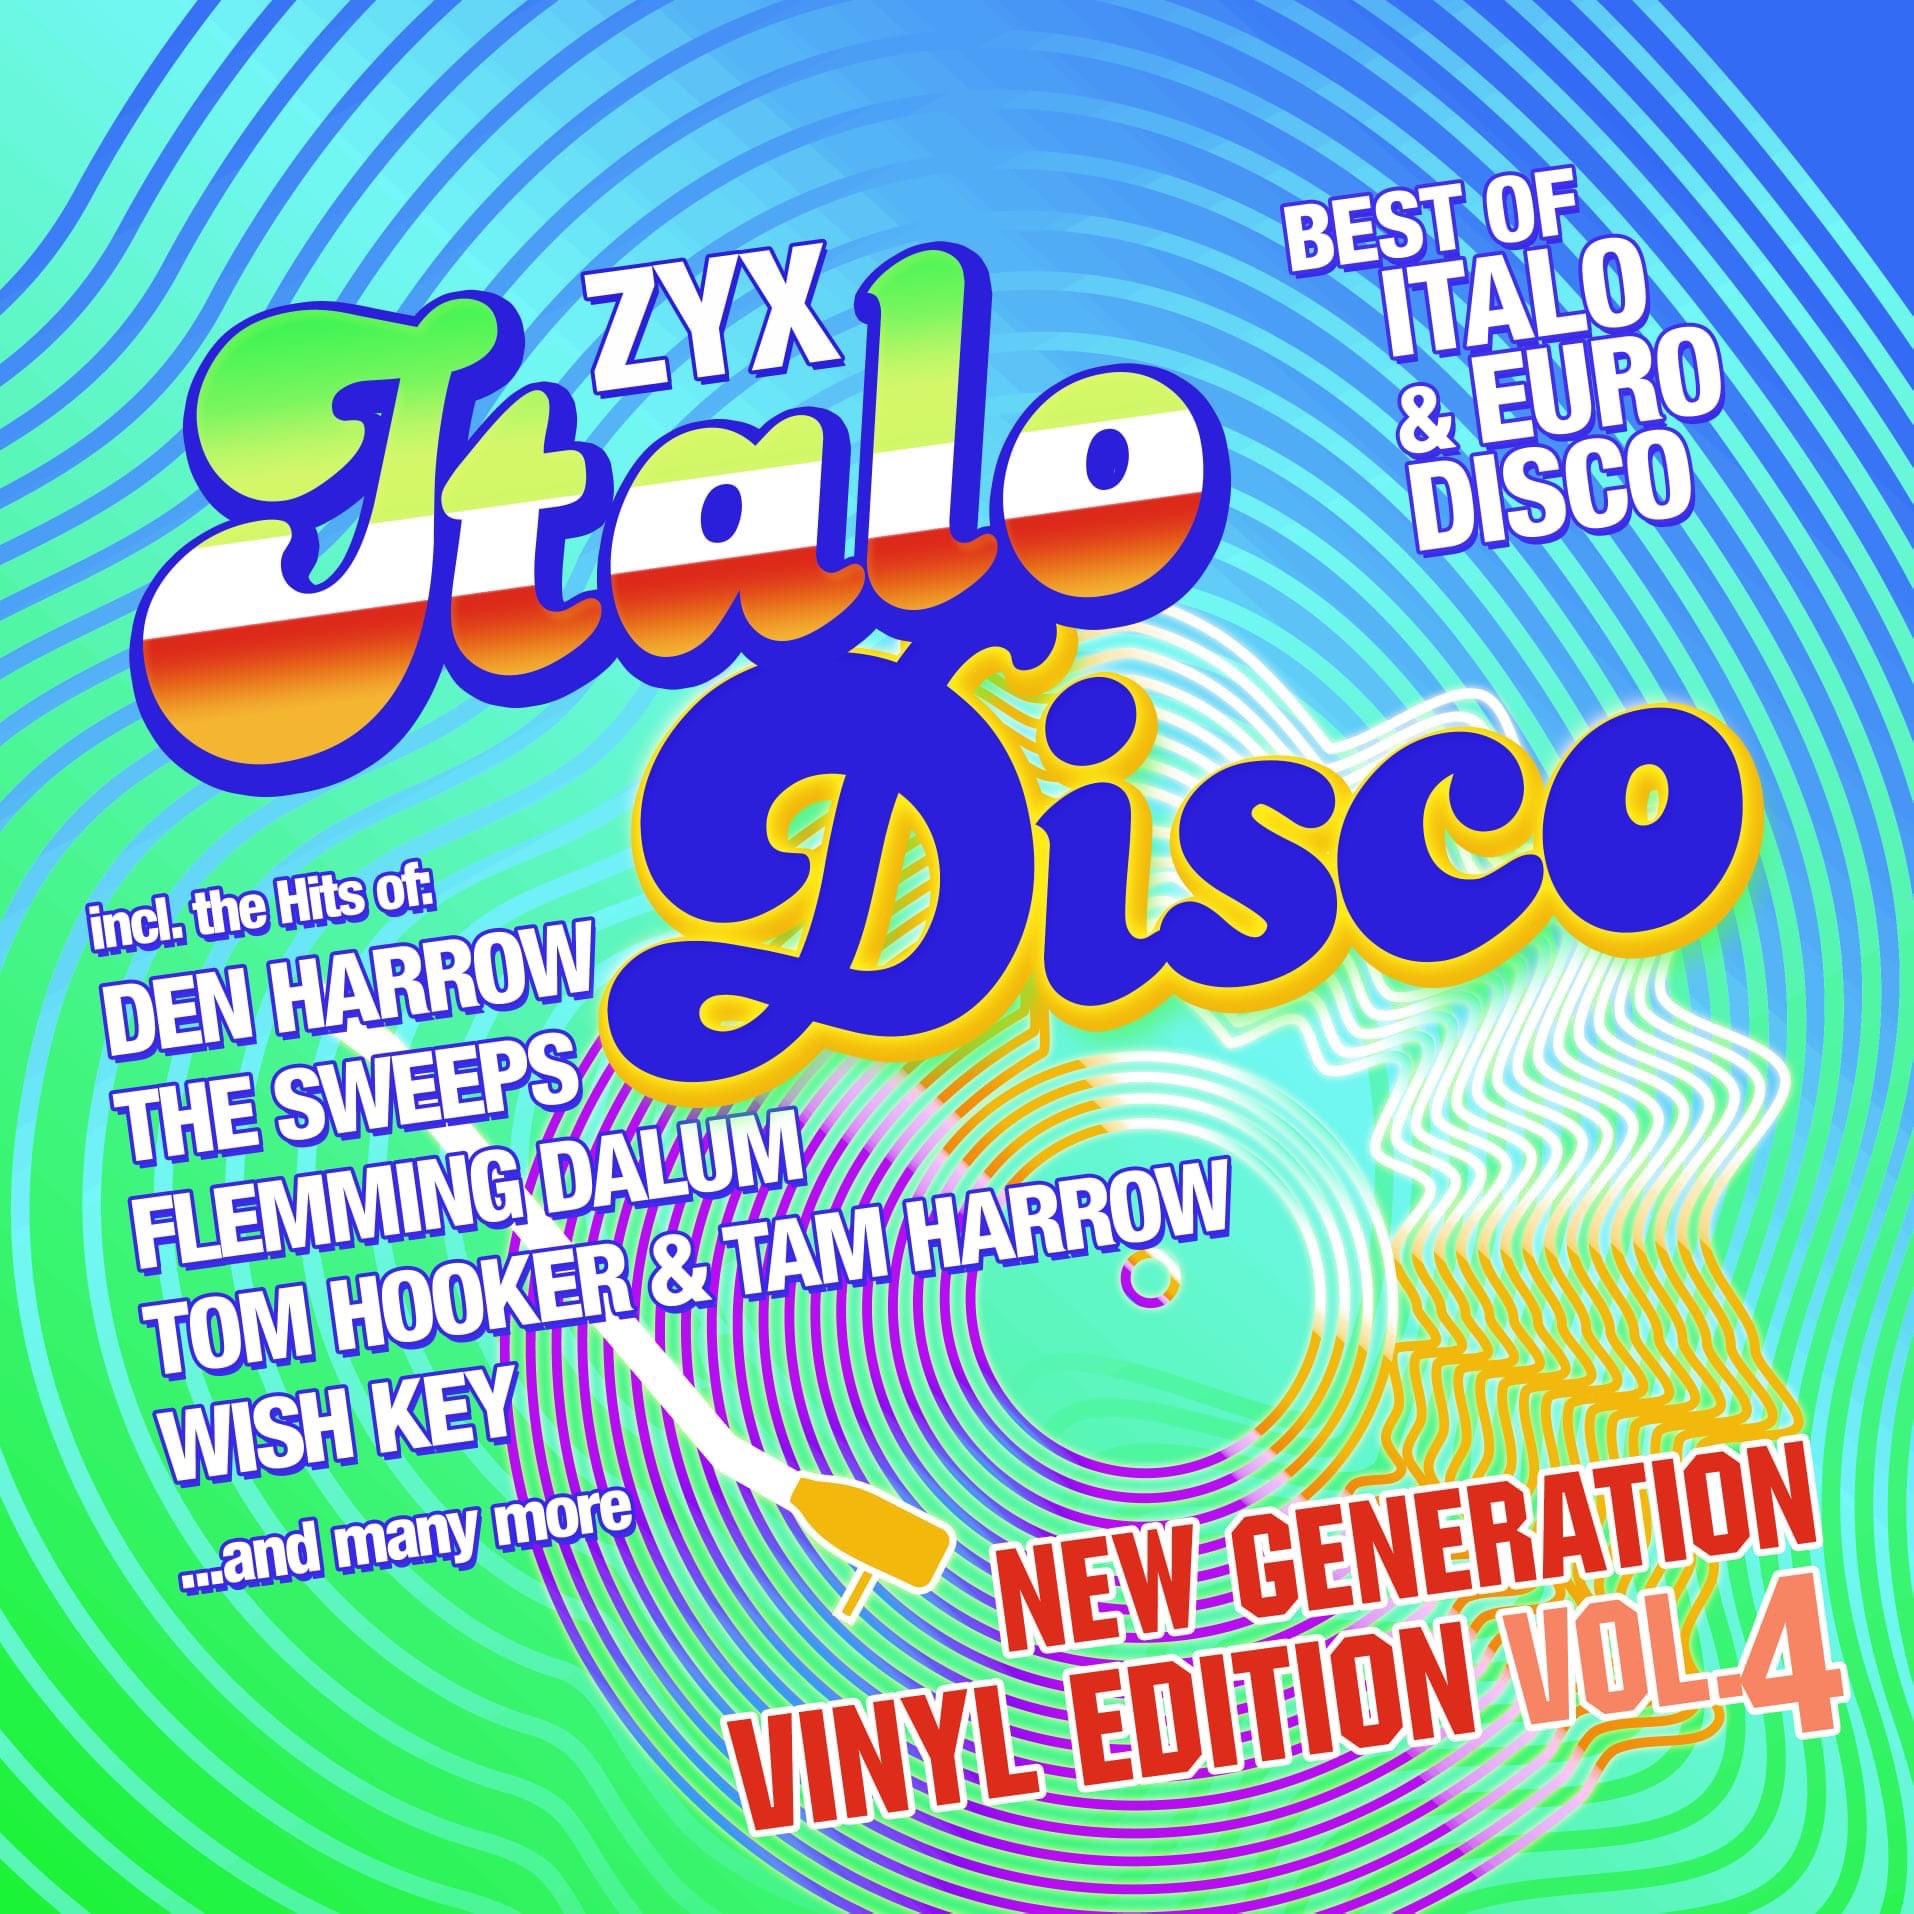 ZYX Music on Twitter: "COMING APRIL 22, 2022!!! 🎉🤩🎧🎼 ZYX Italo Disco New Generation Vinyl 4 presenting 8 super selected Italo Disco songs for you!! Almost 50 minutes of analogue sound